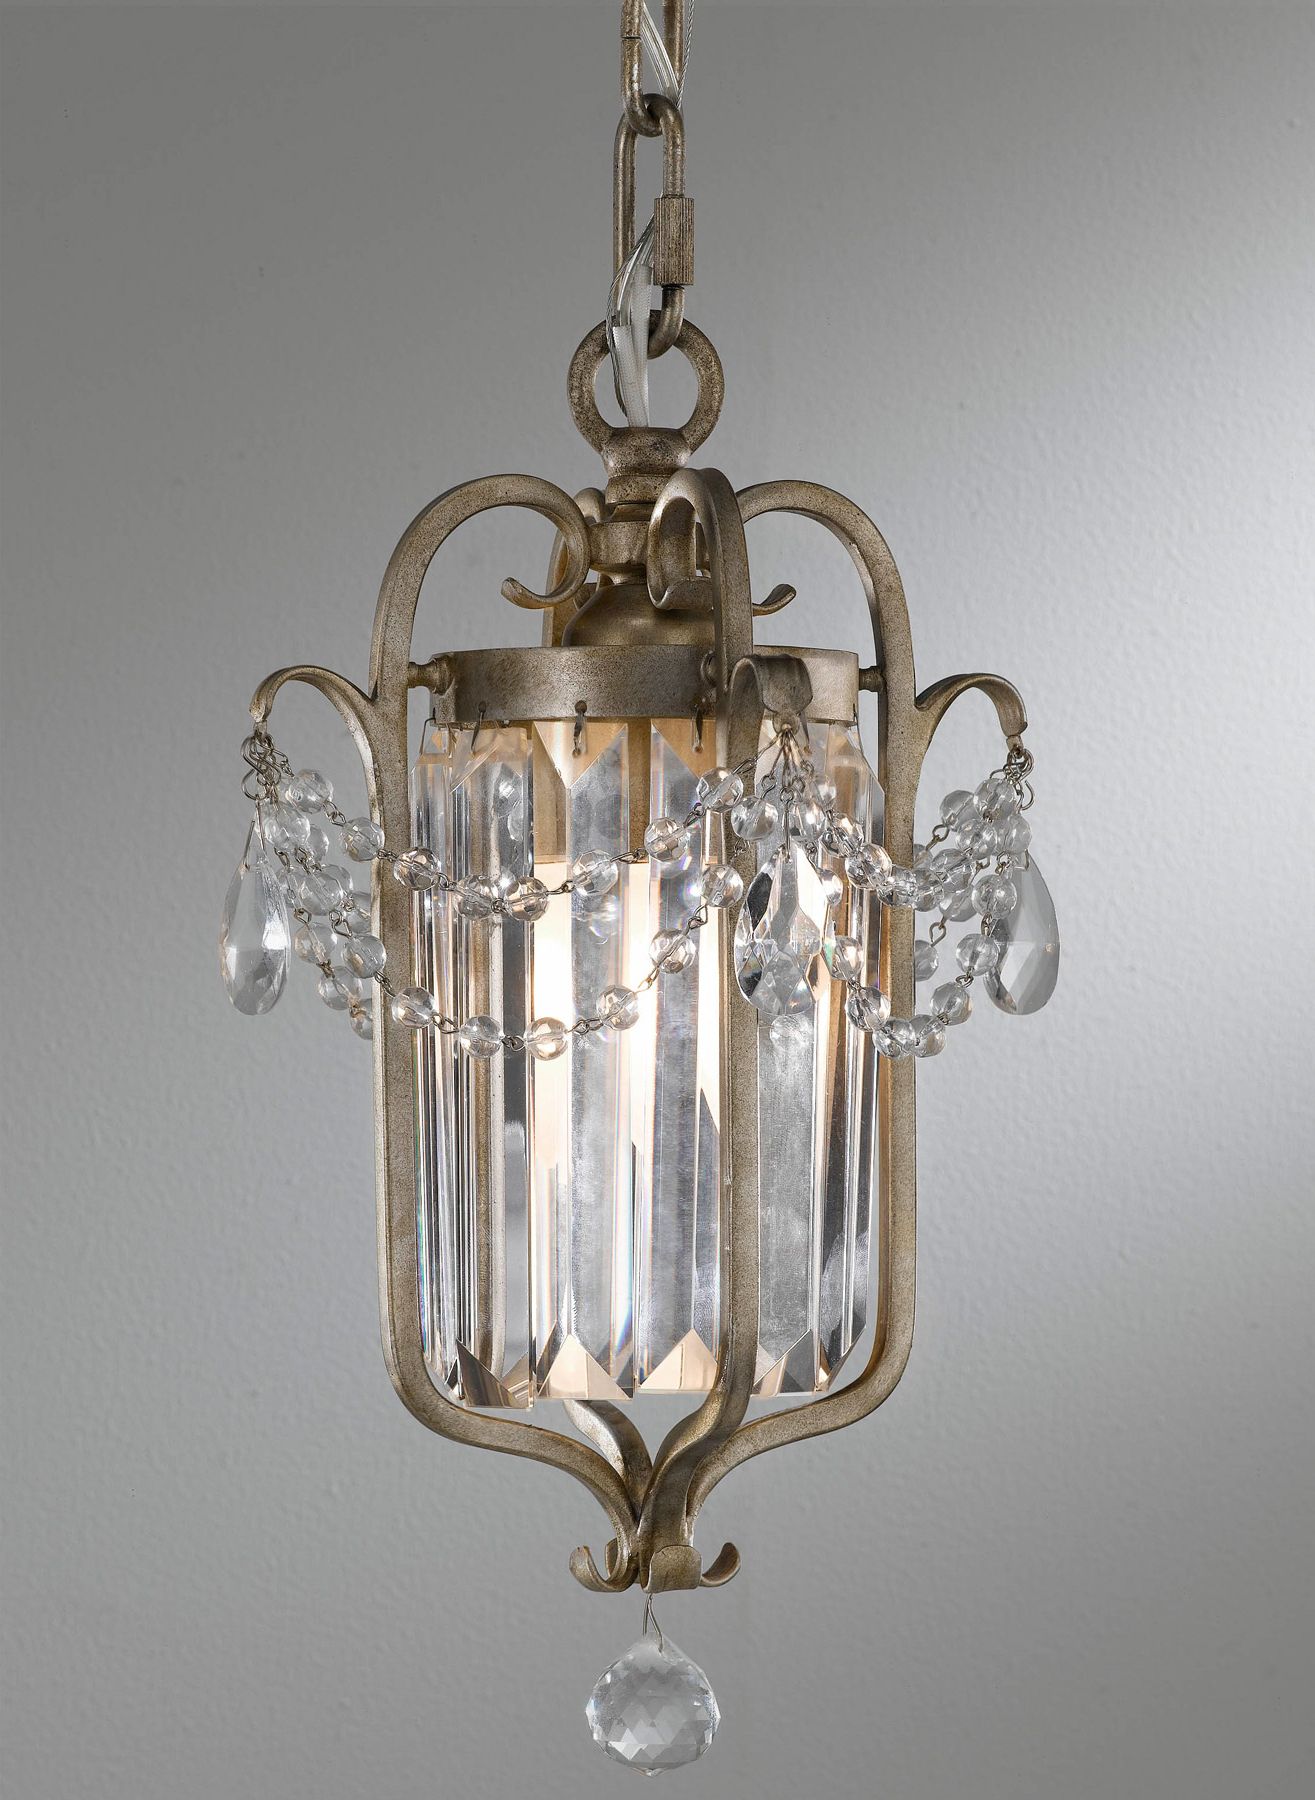 Well Liked Walnut And Crystal Small Mini Chandeliers Inside Murray Feiss F2474/1gs Crystal Gianna Mini Chandelier (View 5 of 15)